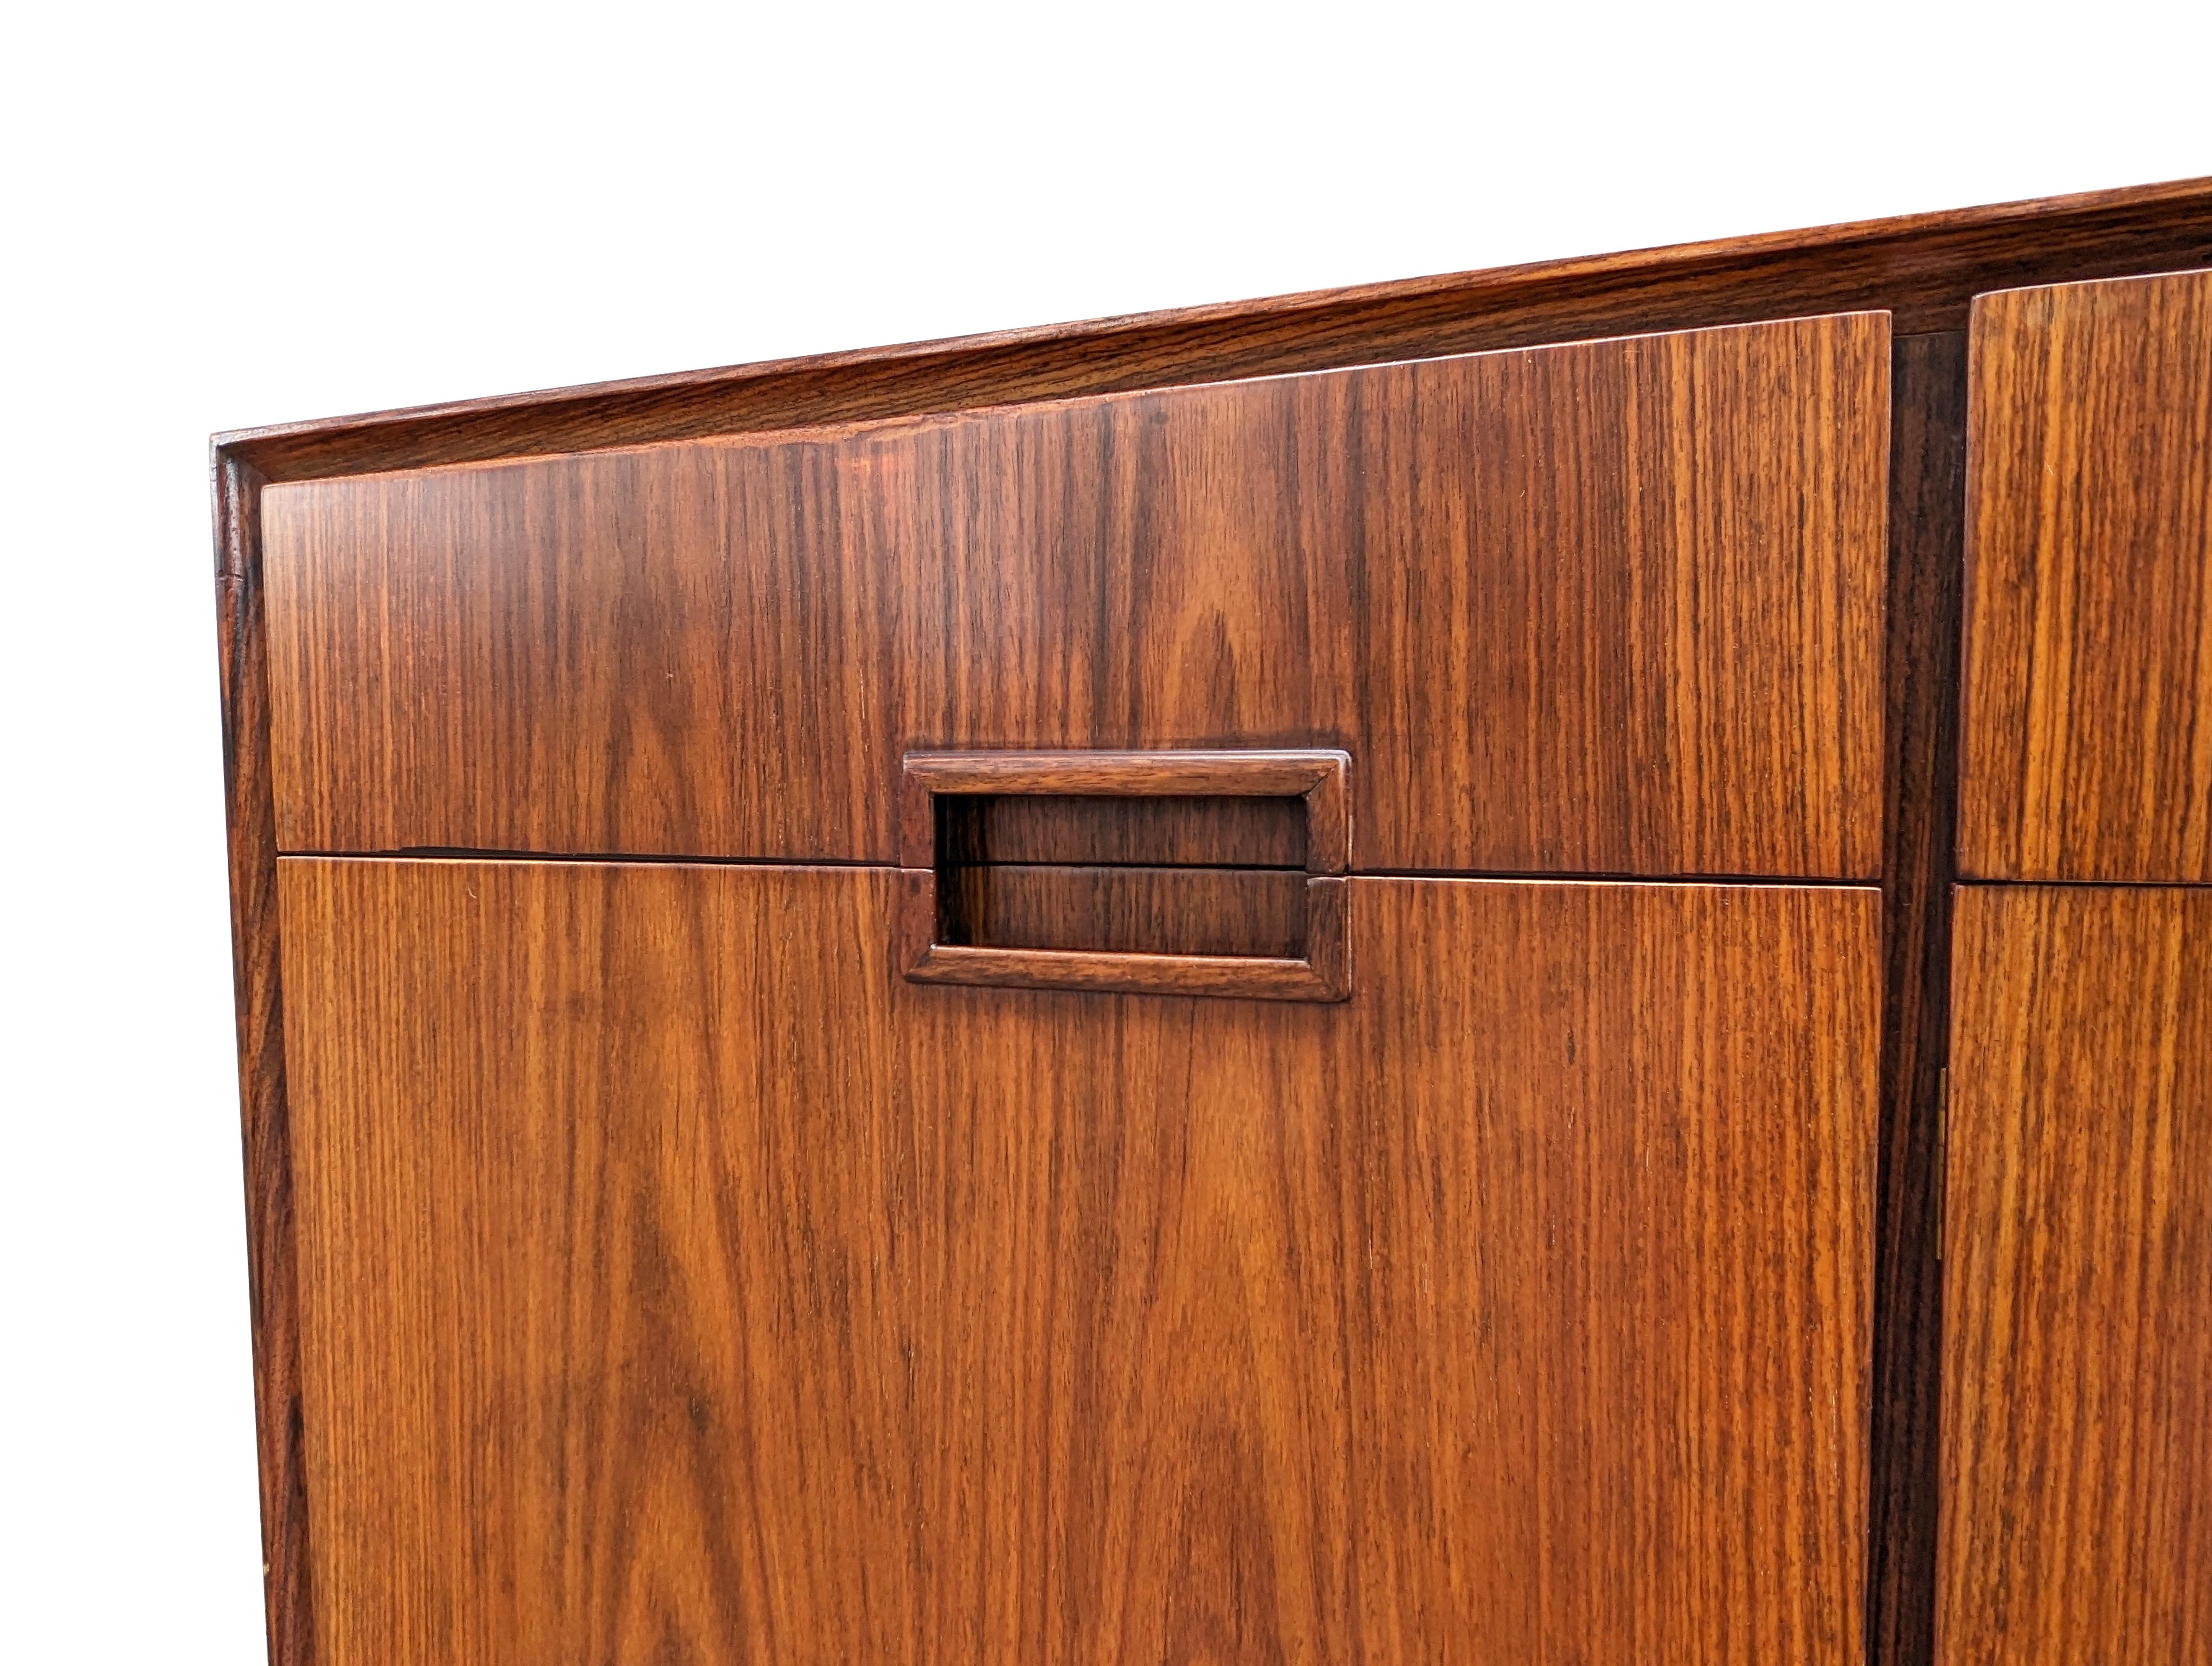 Italian Wooden Mid Century Modern Sideboards in the style of Dassi, set of 2 For Sale 1